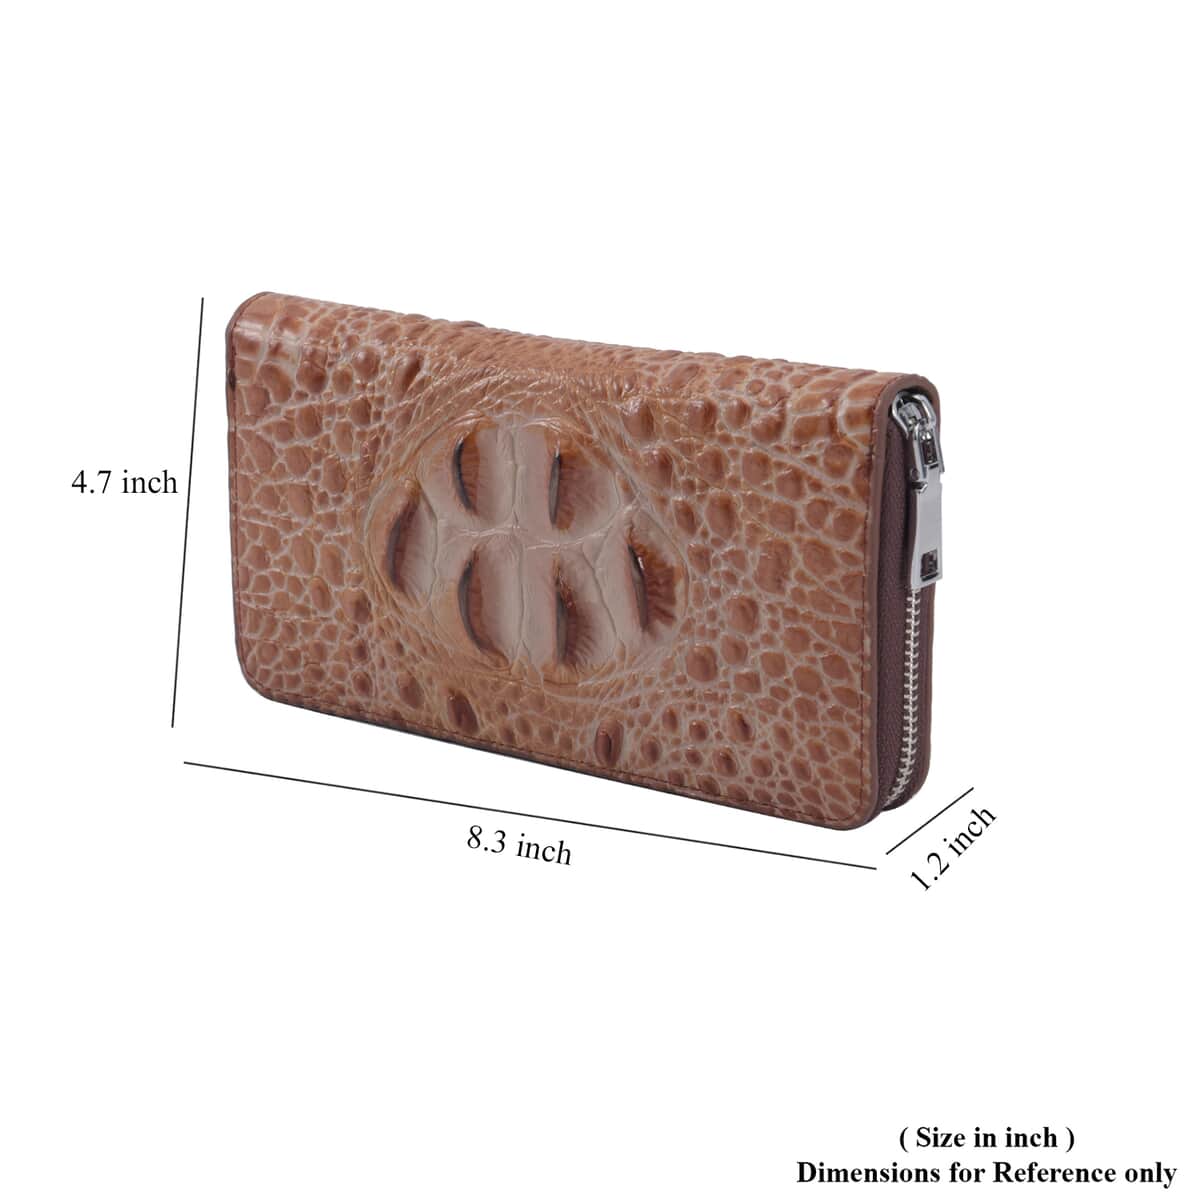 Black Croc Embossed Genuine Leather Wallet (8.3"x1.2"x4.7") with Single Zipped image number 5